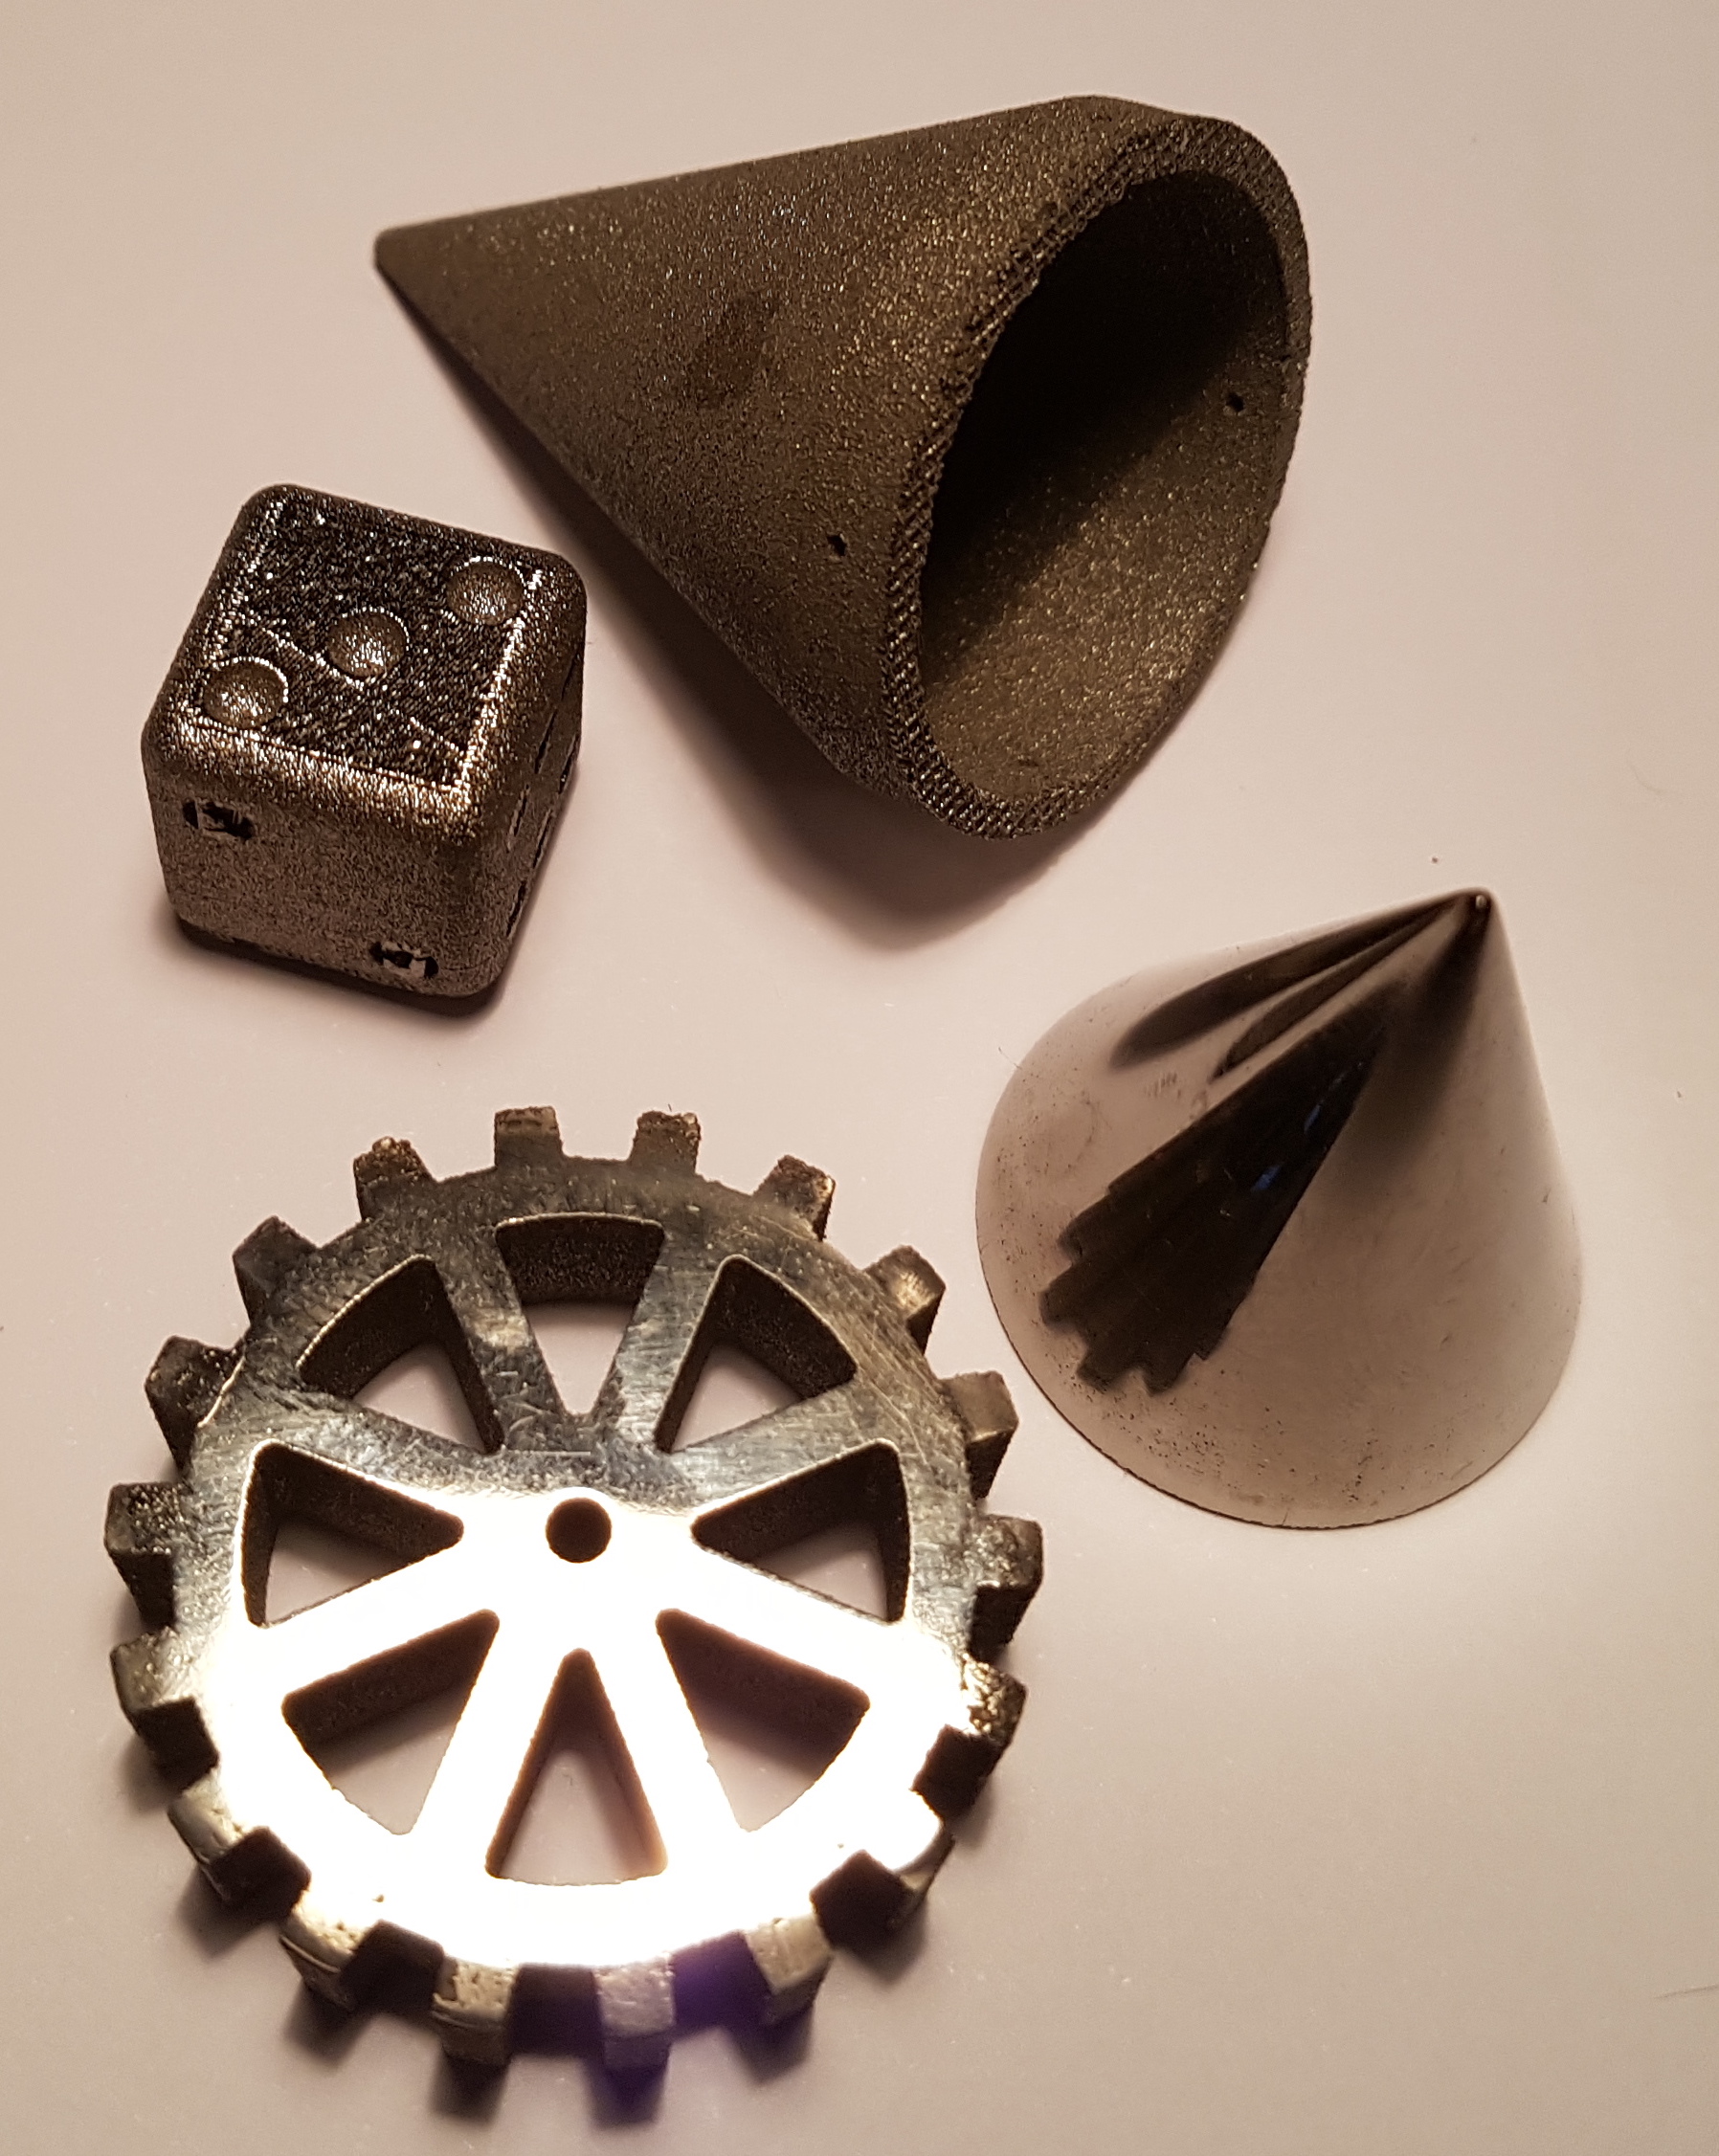 Sample parts made using Exmet AB's additive manufacturing based technology.